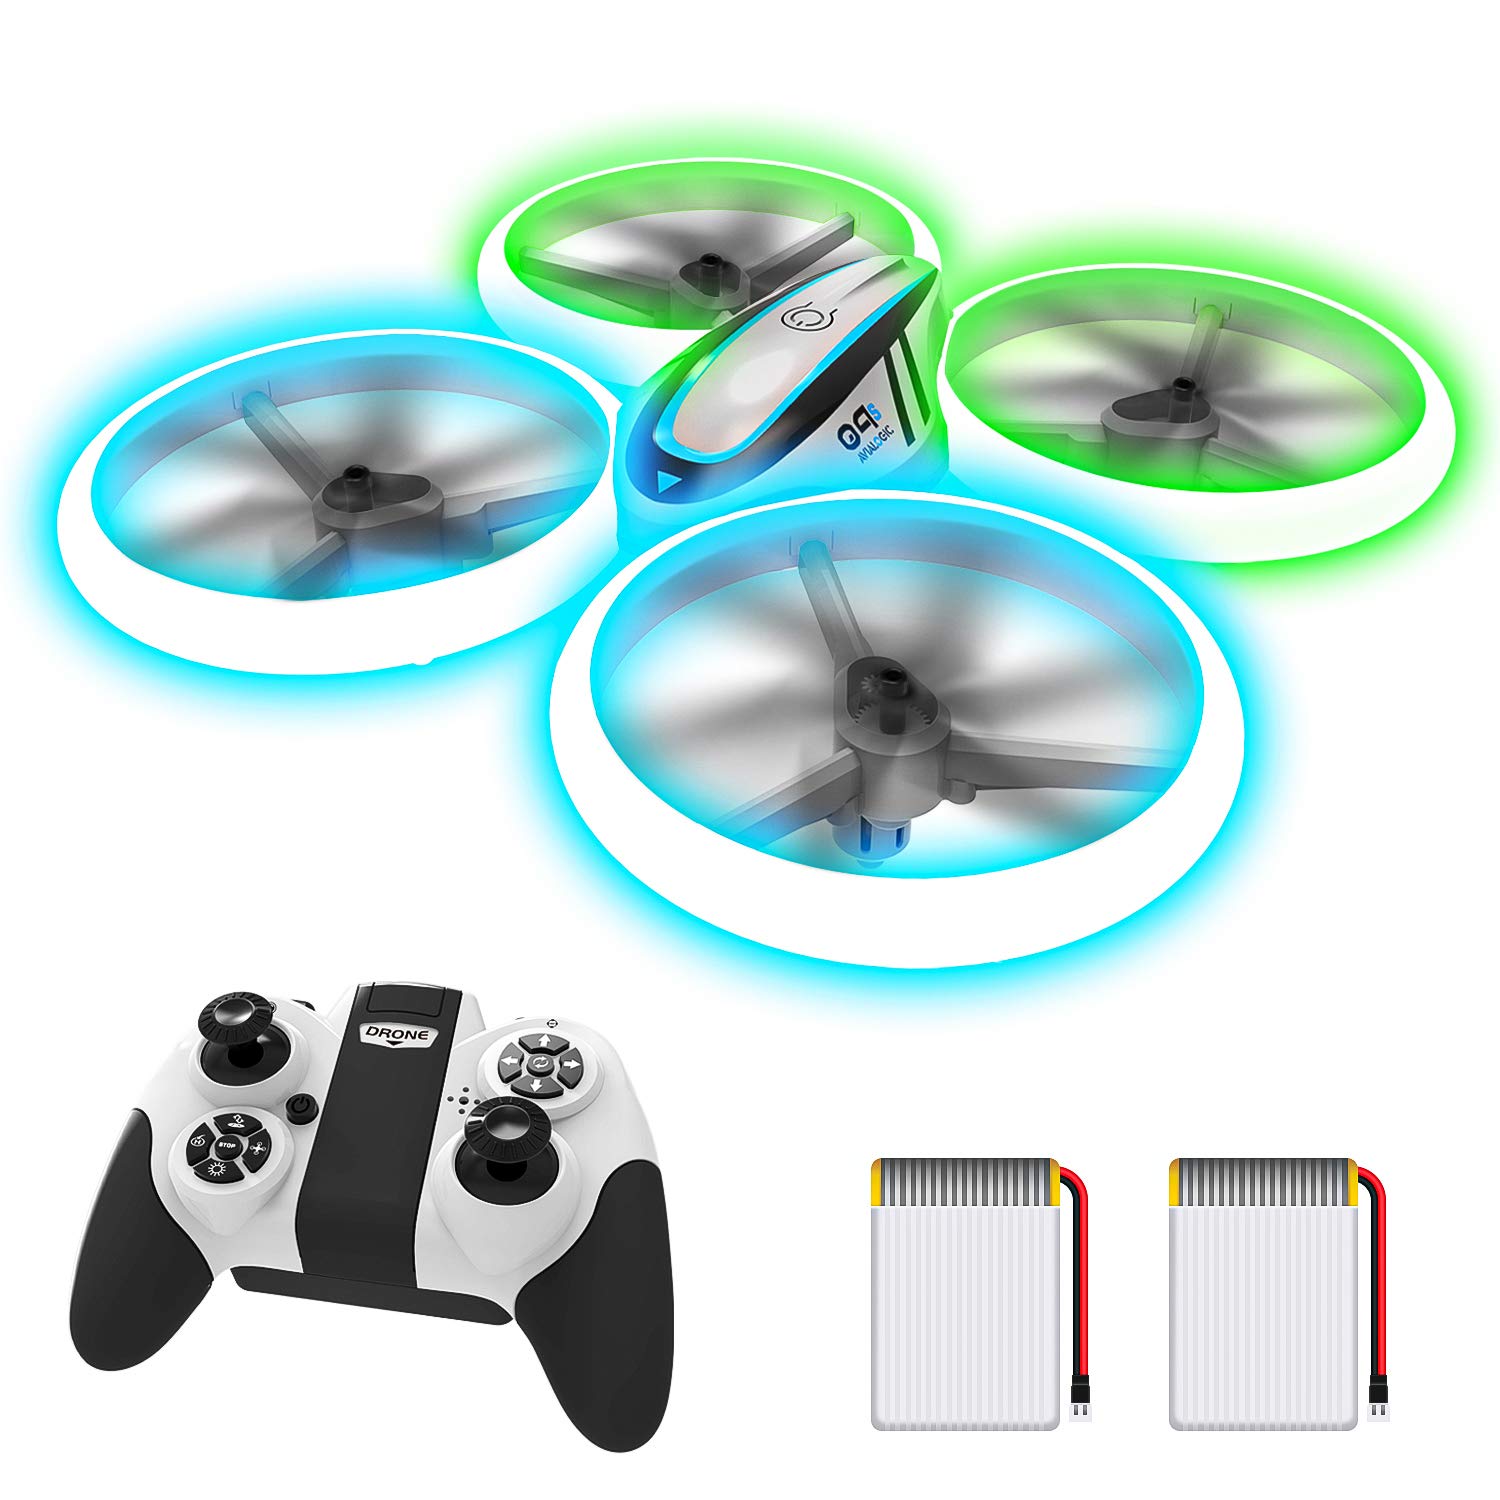  Hasakee Q9s Drones for Kids,RC Drone with Altitude Hold and Headless Mode,Quadcopter with Blue&Green Light,Propeller Full Protect,2 Batteries and Remote Control,Easy to fly Kids Gifts Toys for Boys...